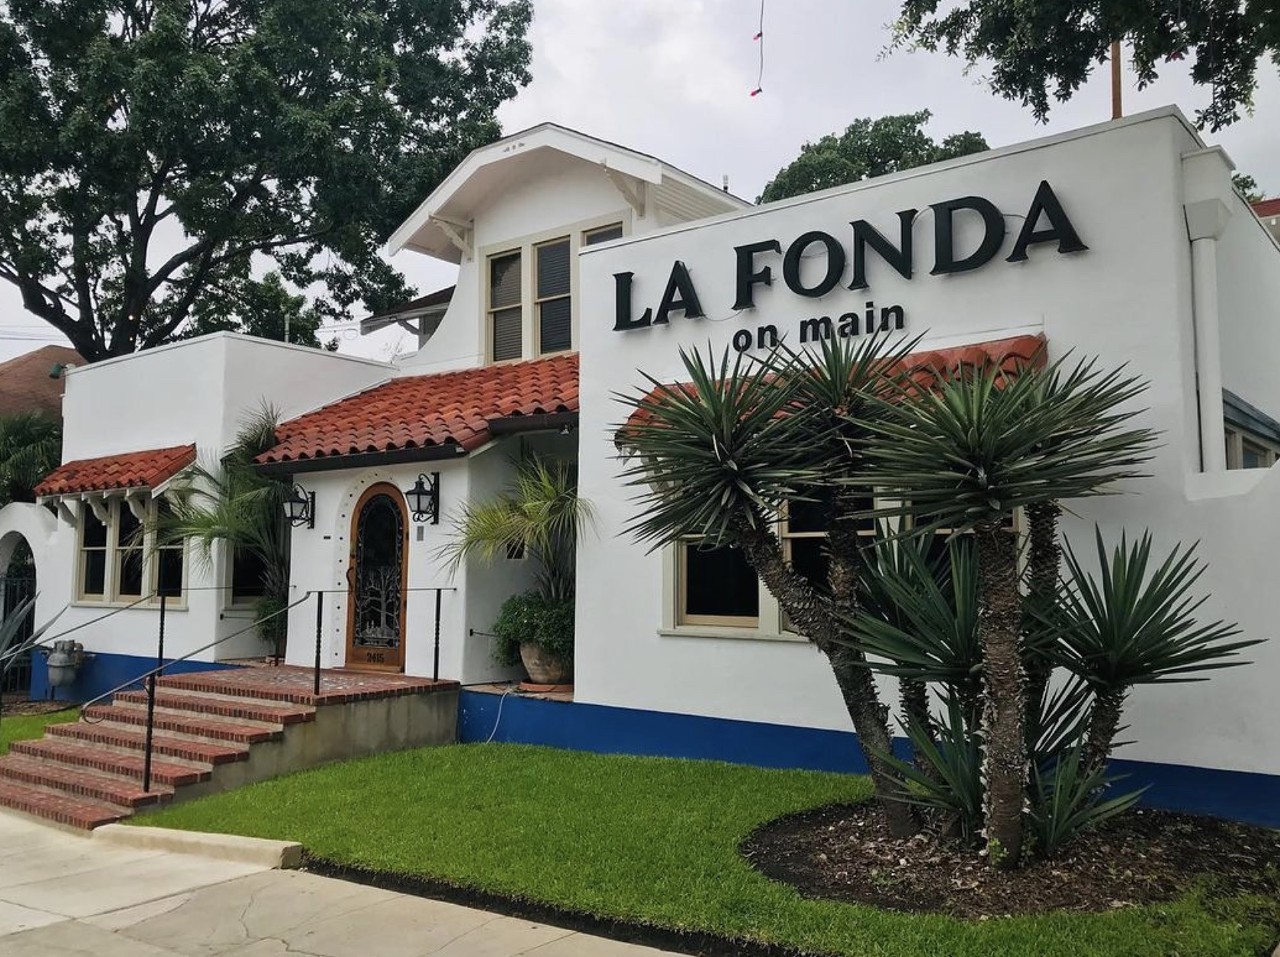 La Fonda on Main
2415 N. Main Ave., (210) 733-0621, lafondaonmain.com
A classic for Tex-Mex and Mexican fare since 1932, the longstanding La Fonda on Main is one of those SA spots that everyone has to try at least once. Hurry to claim a shady seat on the patio.